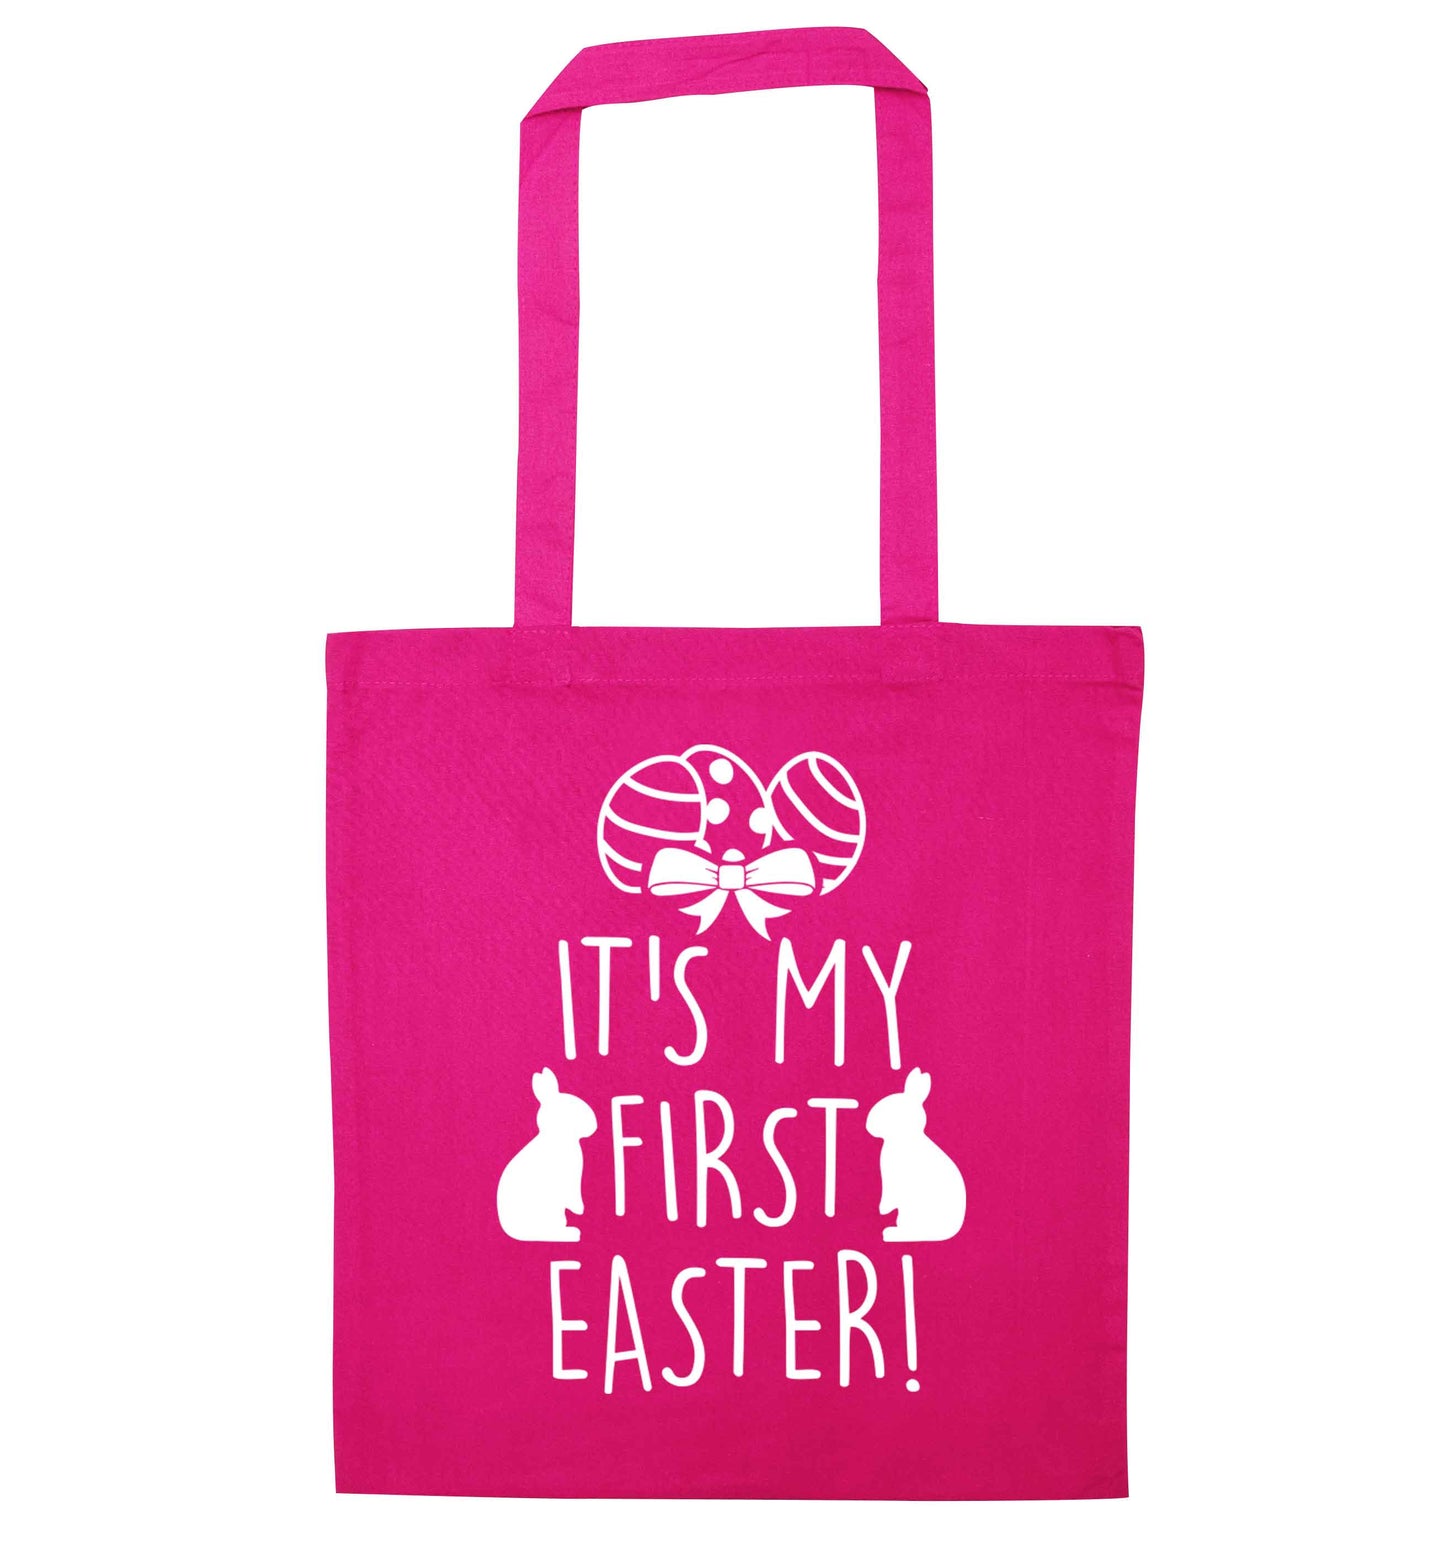 It's my first Easter pink tote bag